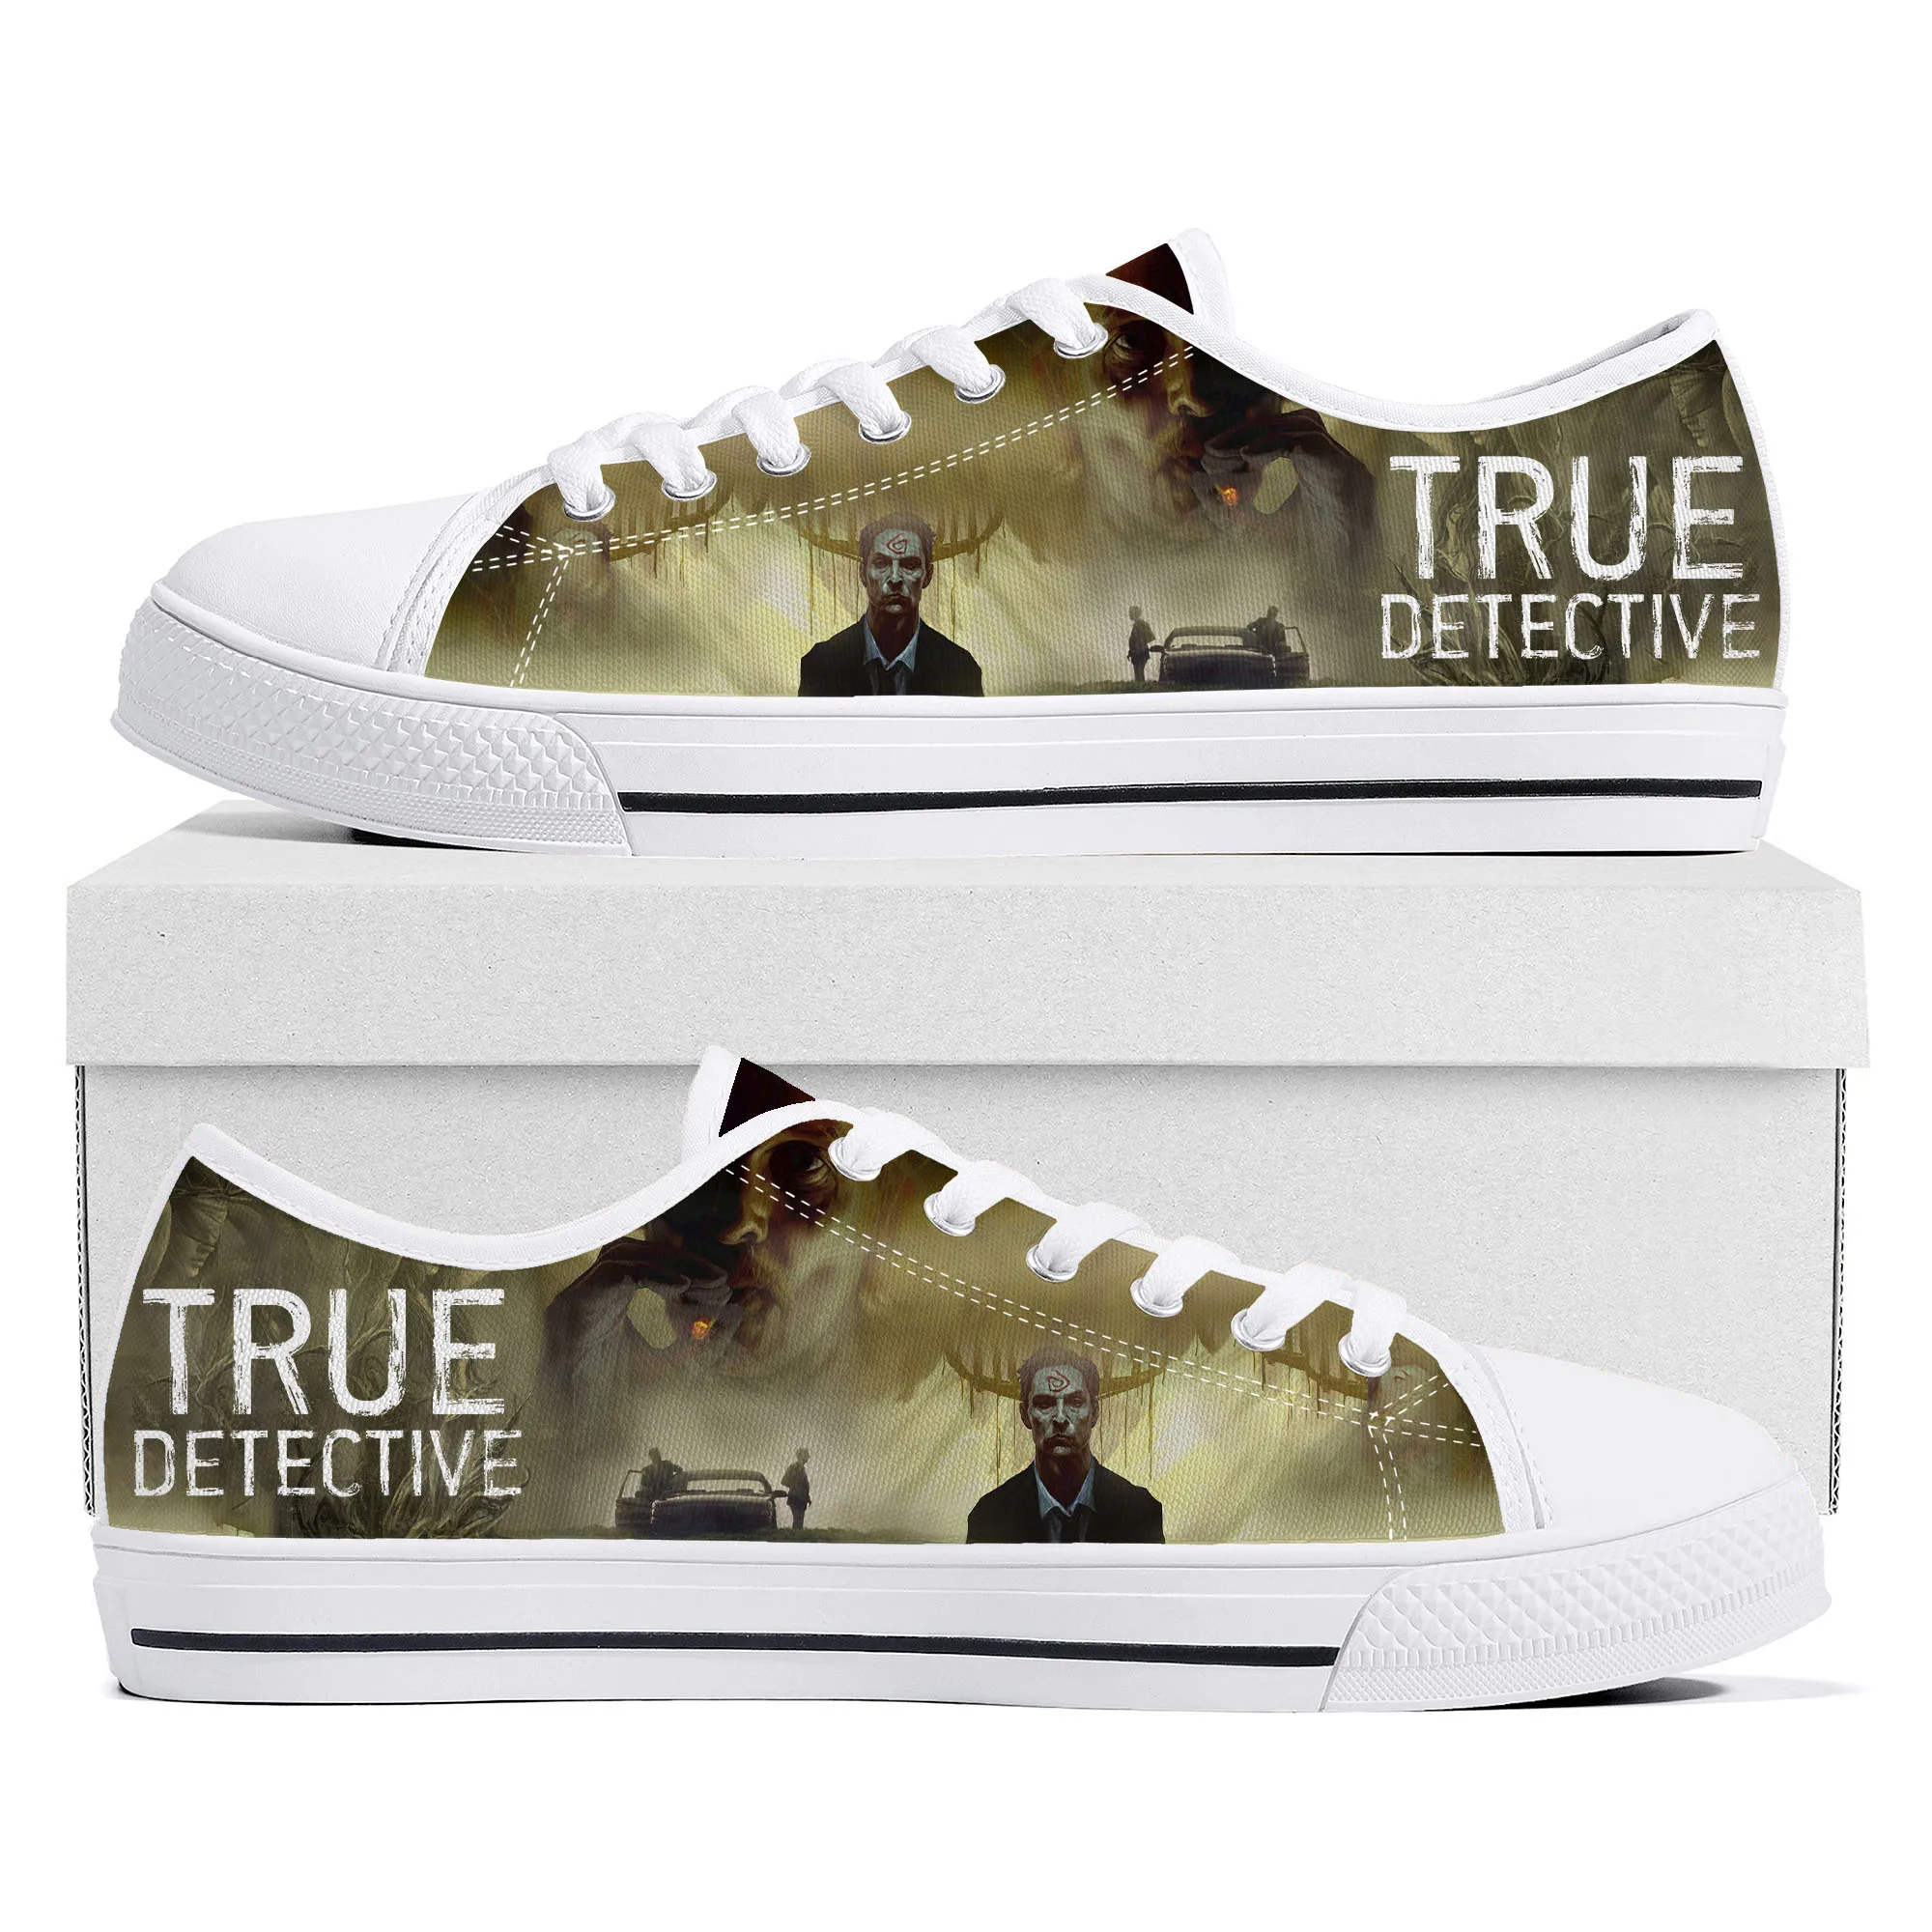 

True Detective Low Top Sneakers Mens Womens Teenager Canvas High Quality Sneaker Casual Custom Made Shoes Customize DIY Shoe